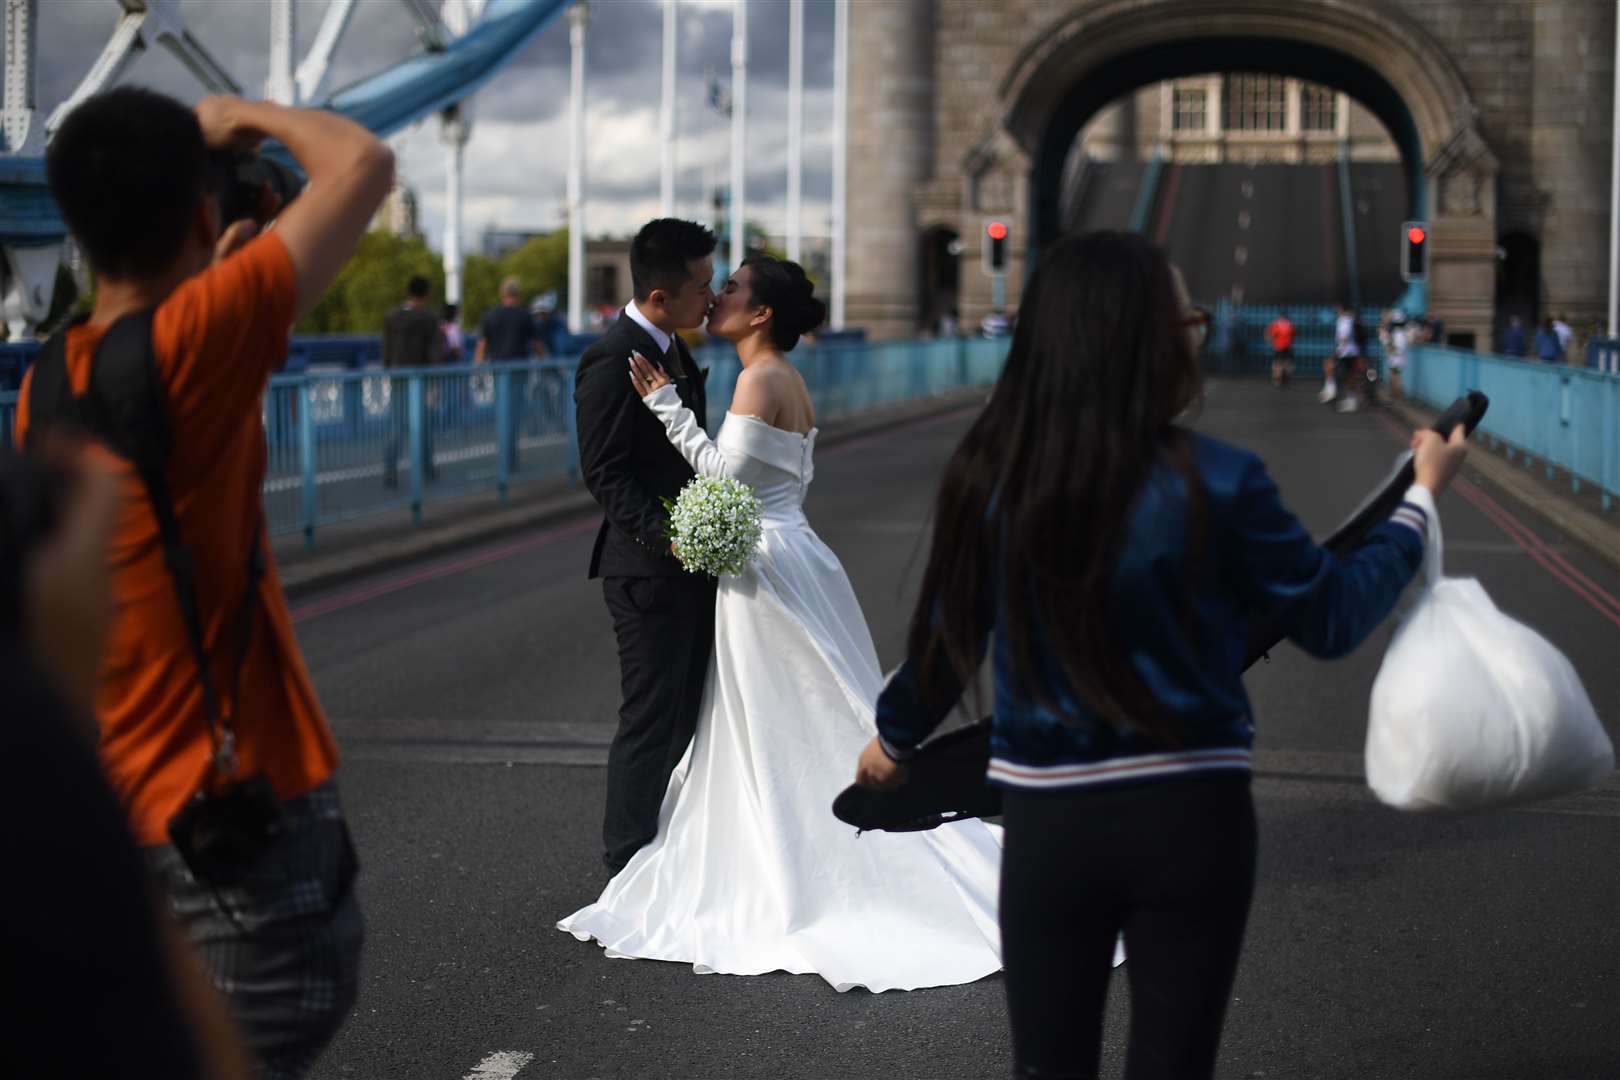 Sealed with a kiss (Victoria Jones/PA)